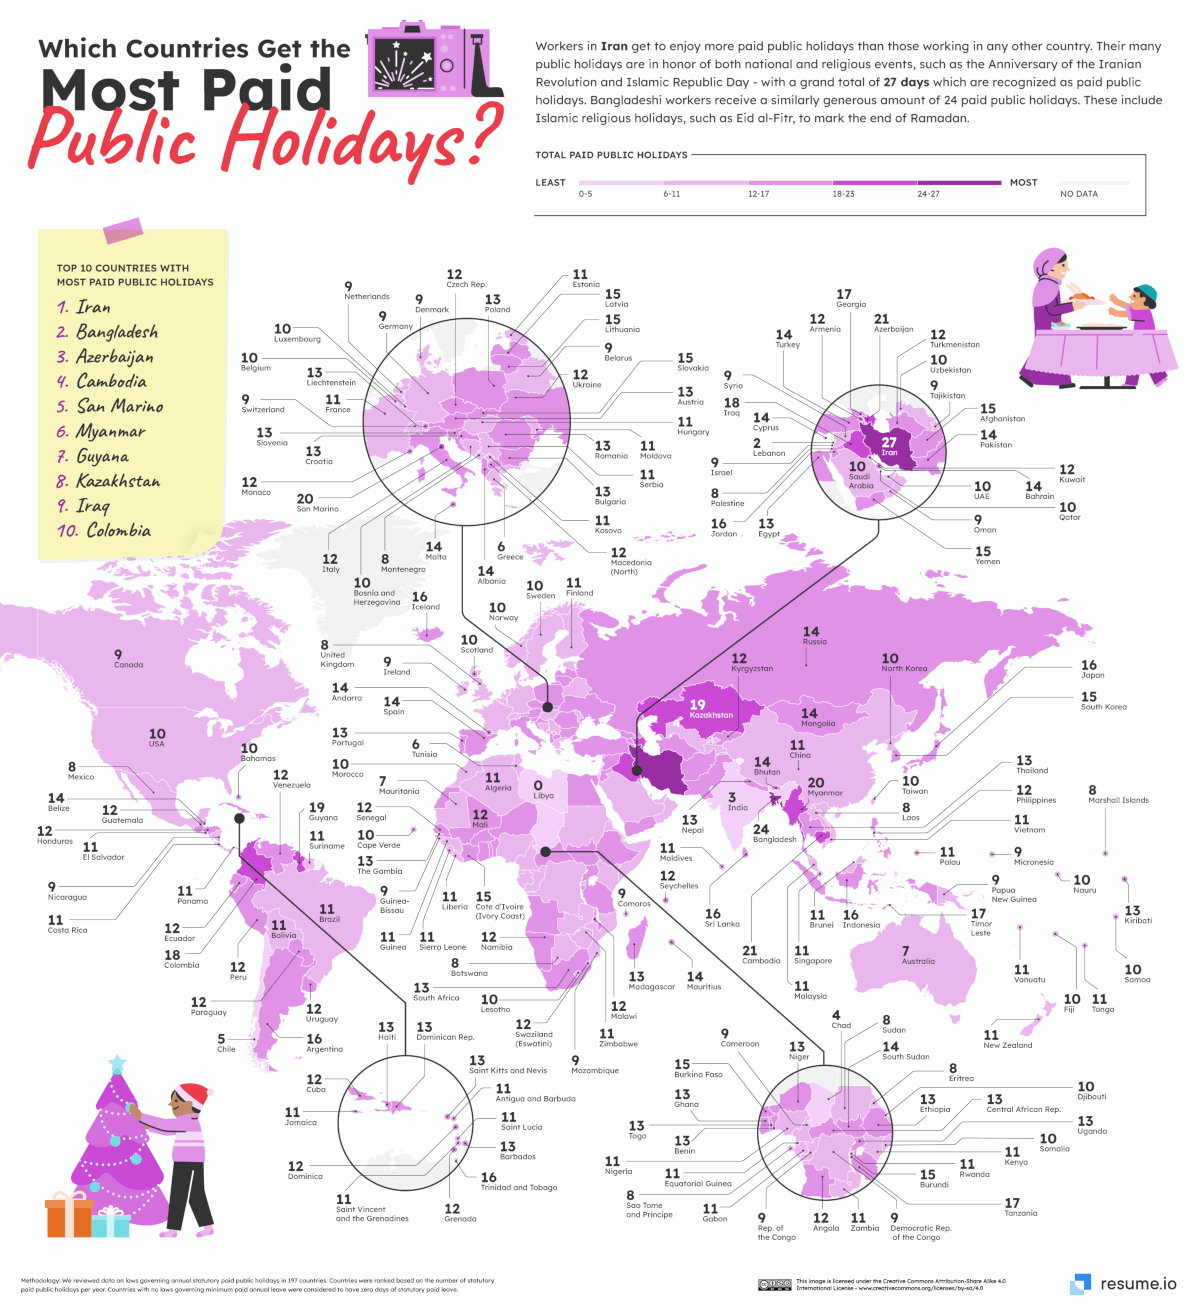 Resume.io visual on countries with the most paid public holidays